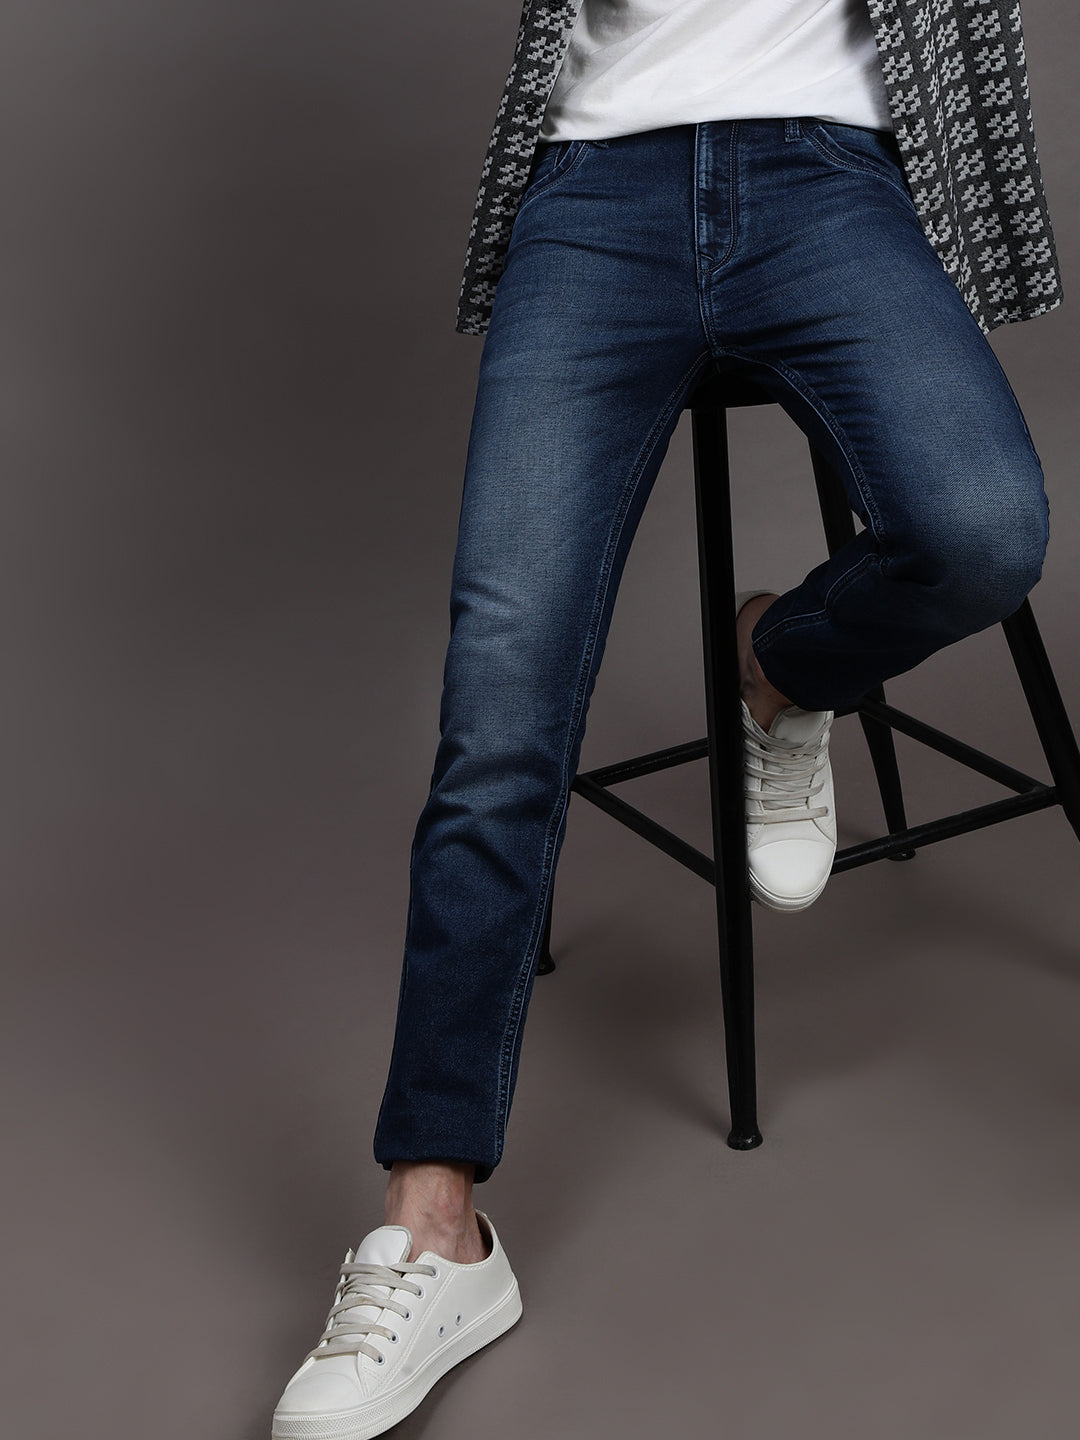 PREMIUM KNITTED DARK WASHED JEANS FOR MEN